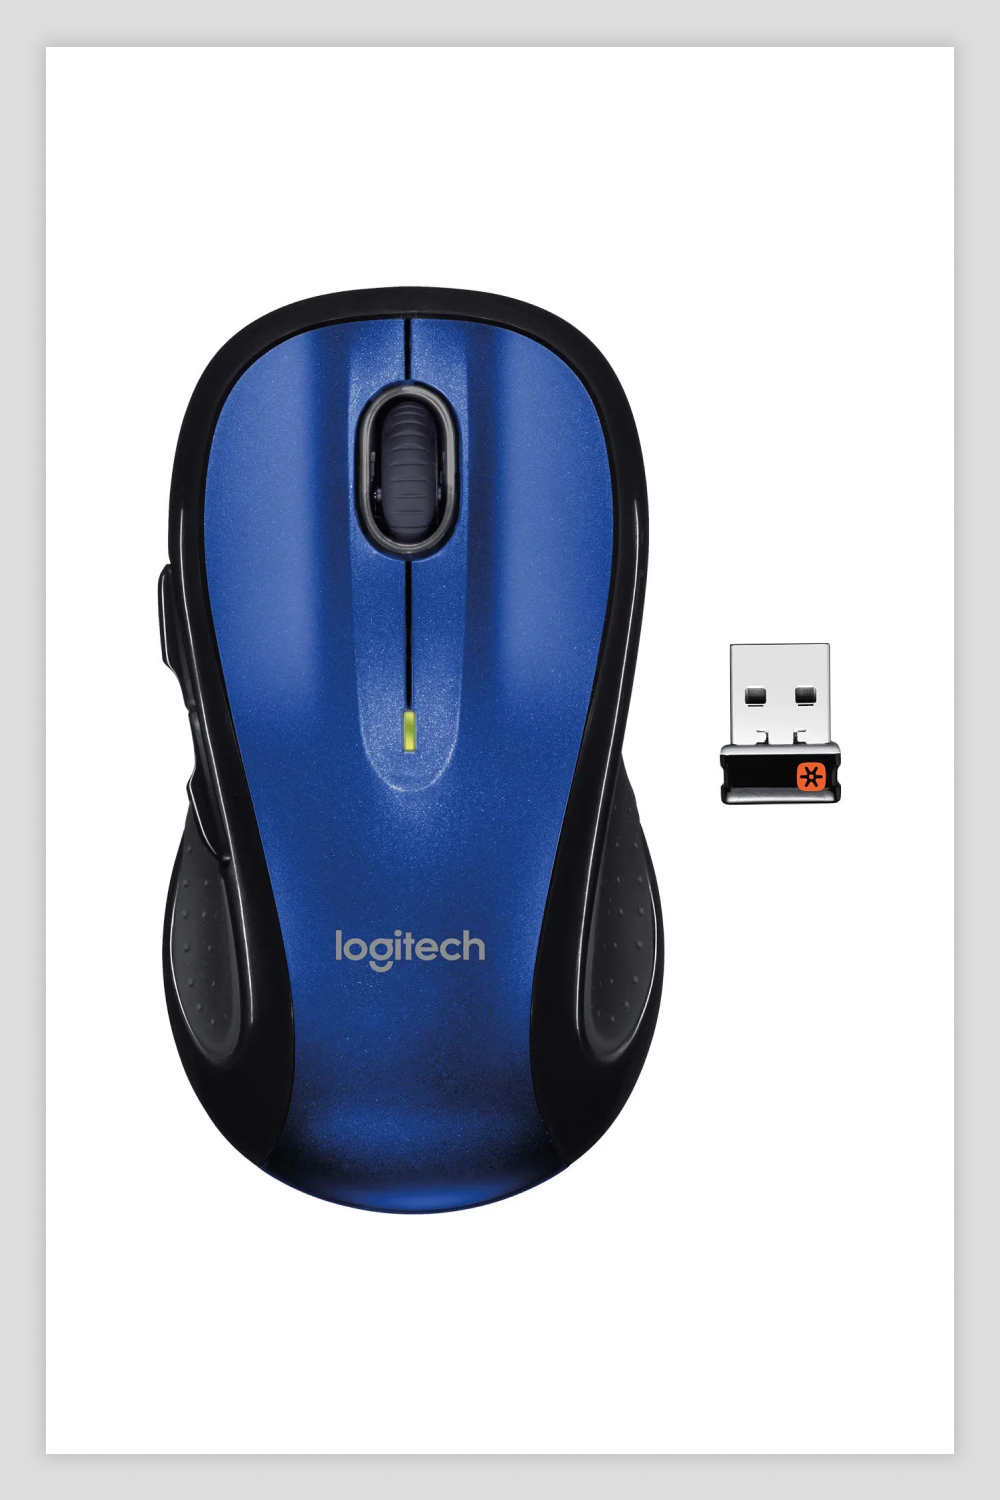 Blue and black Logitech M510 Wireless Computer Mouse.